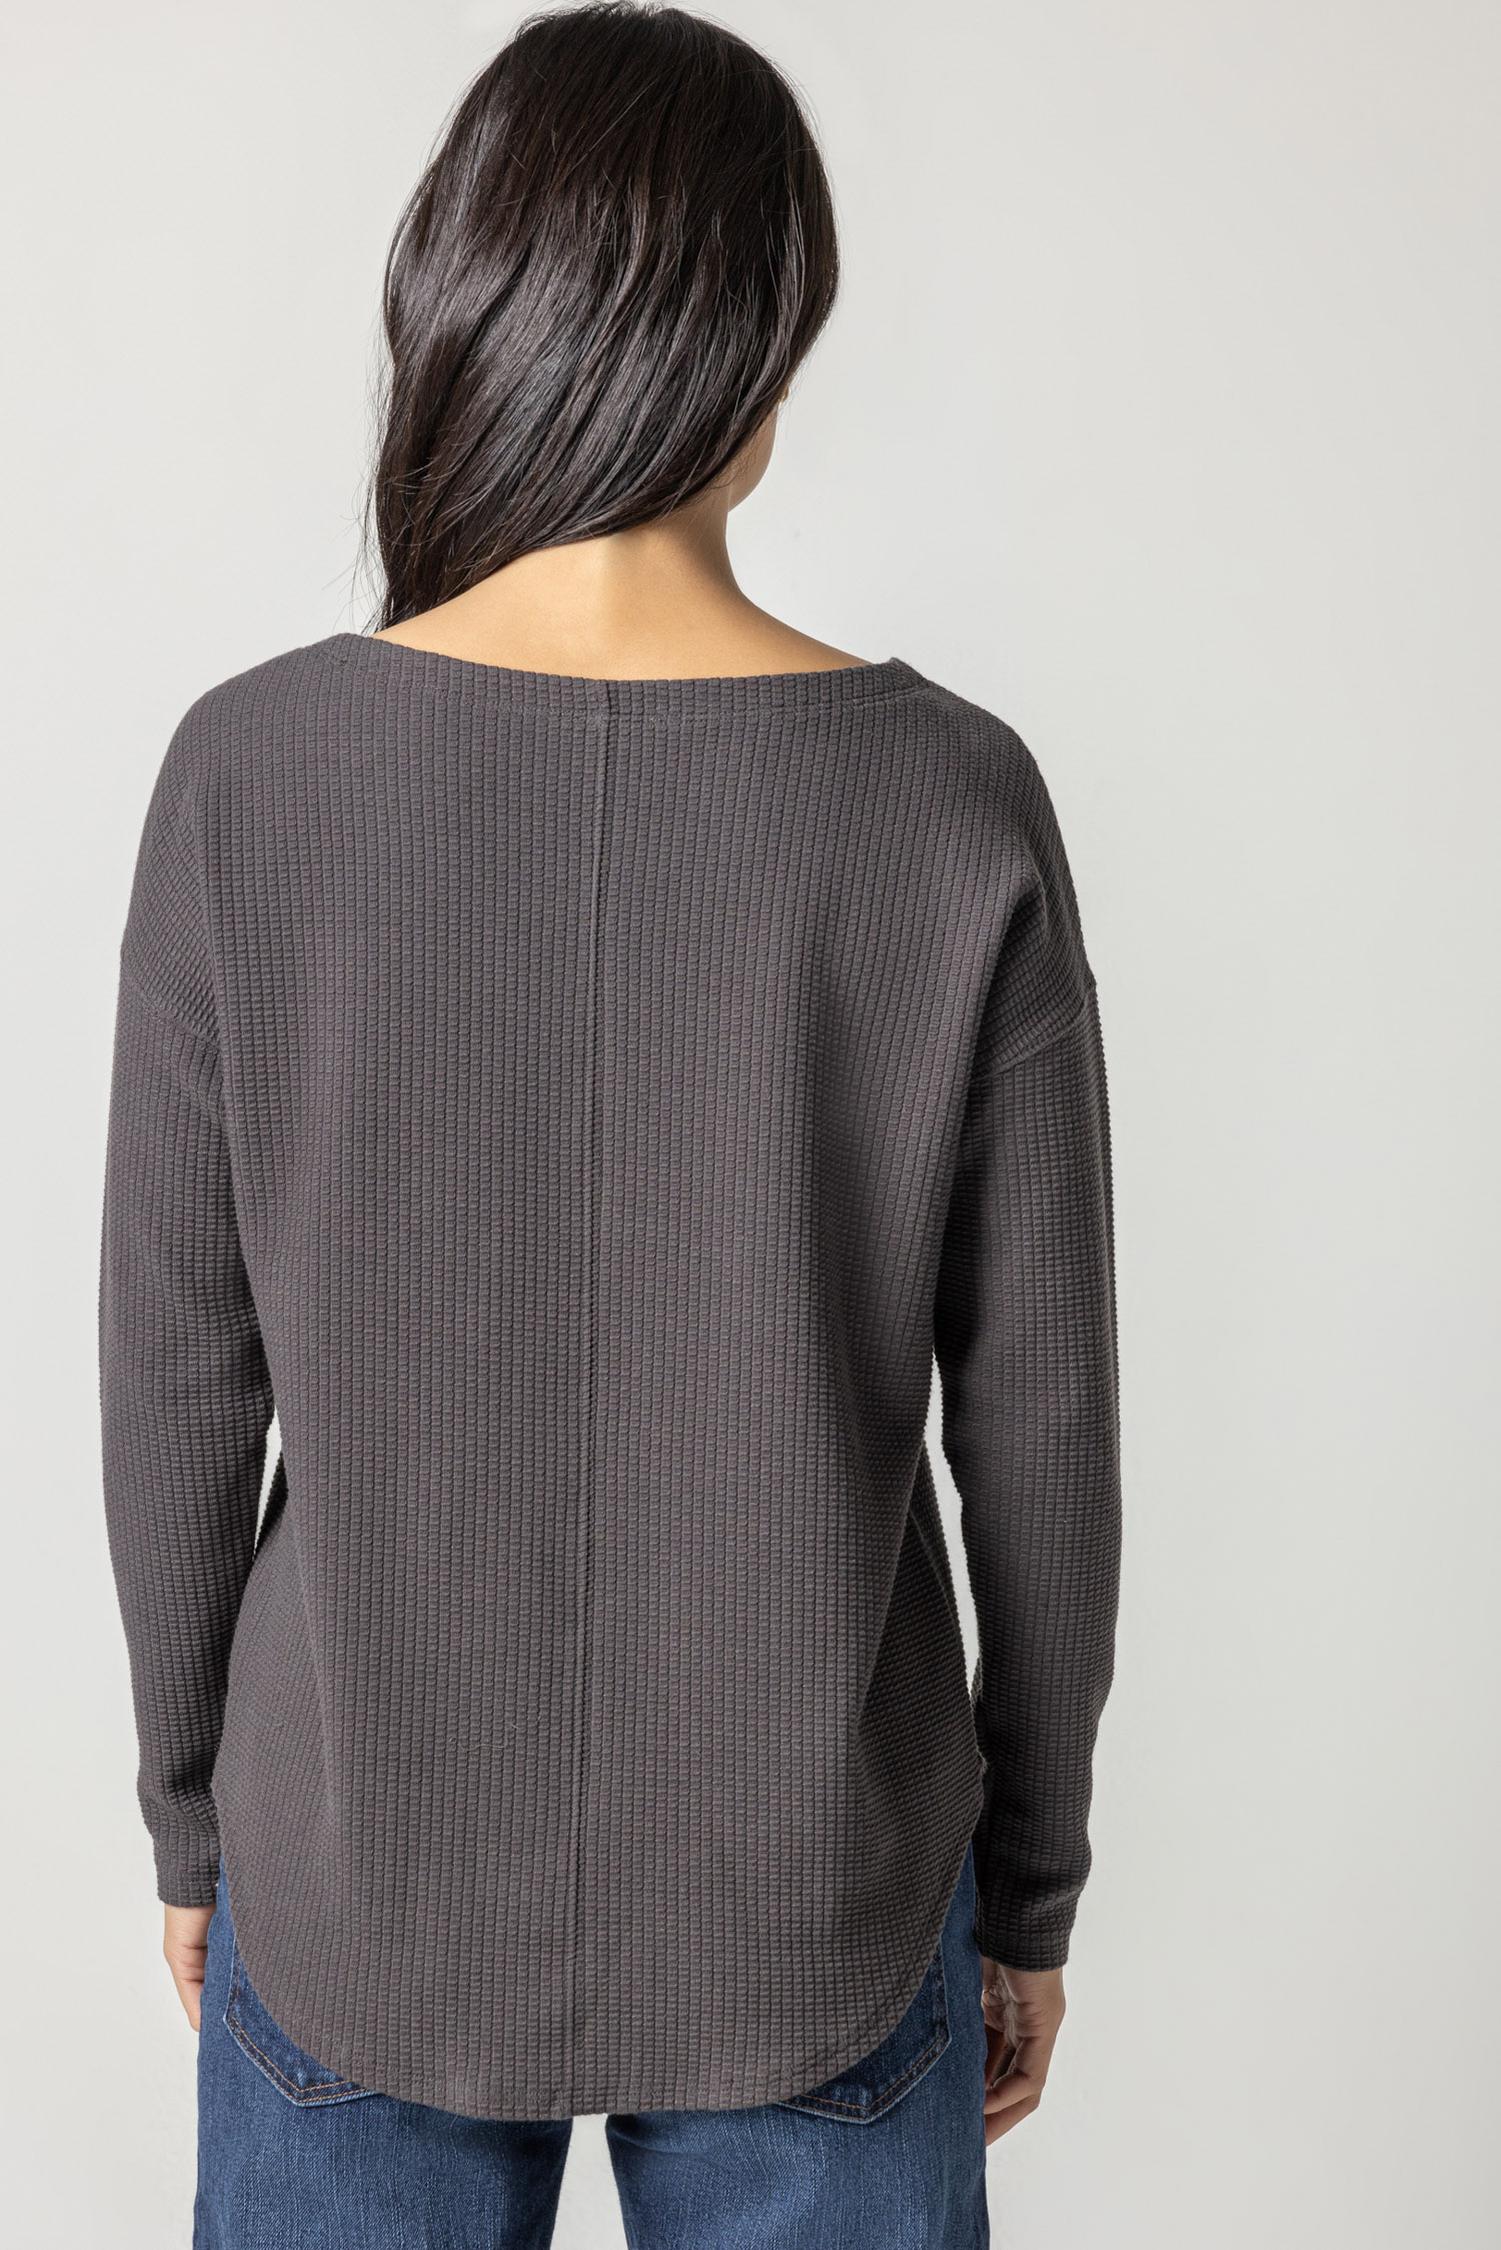 AirEssentials Crew Neck Top by SPANX